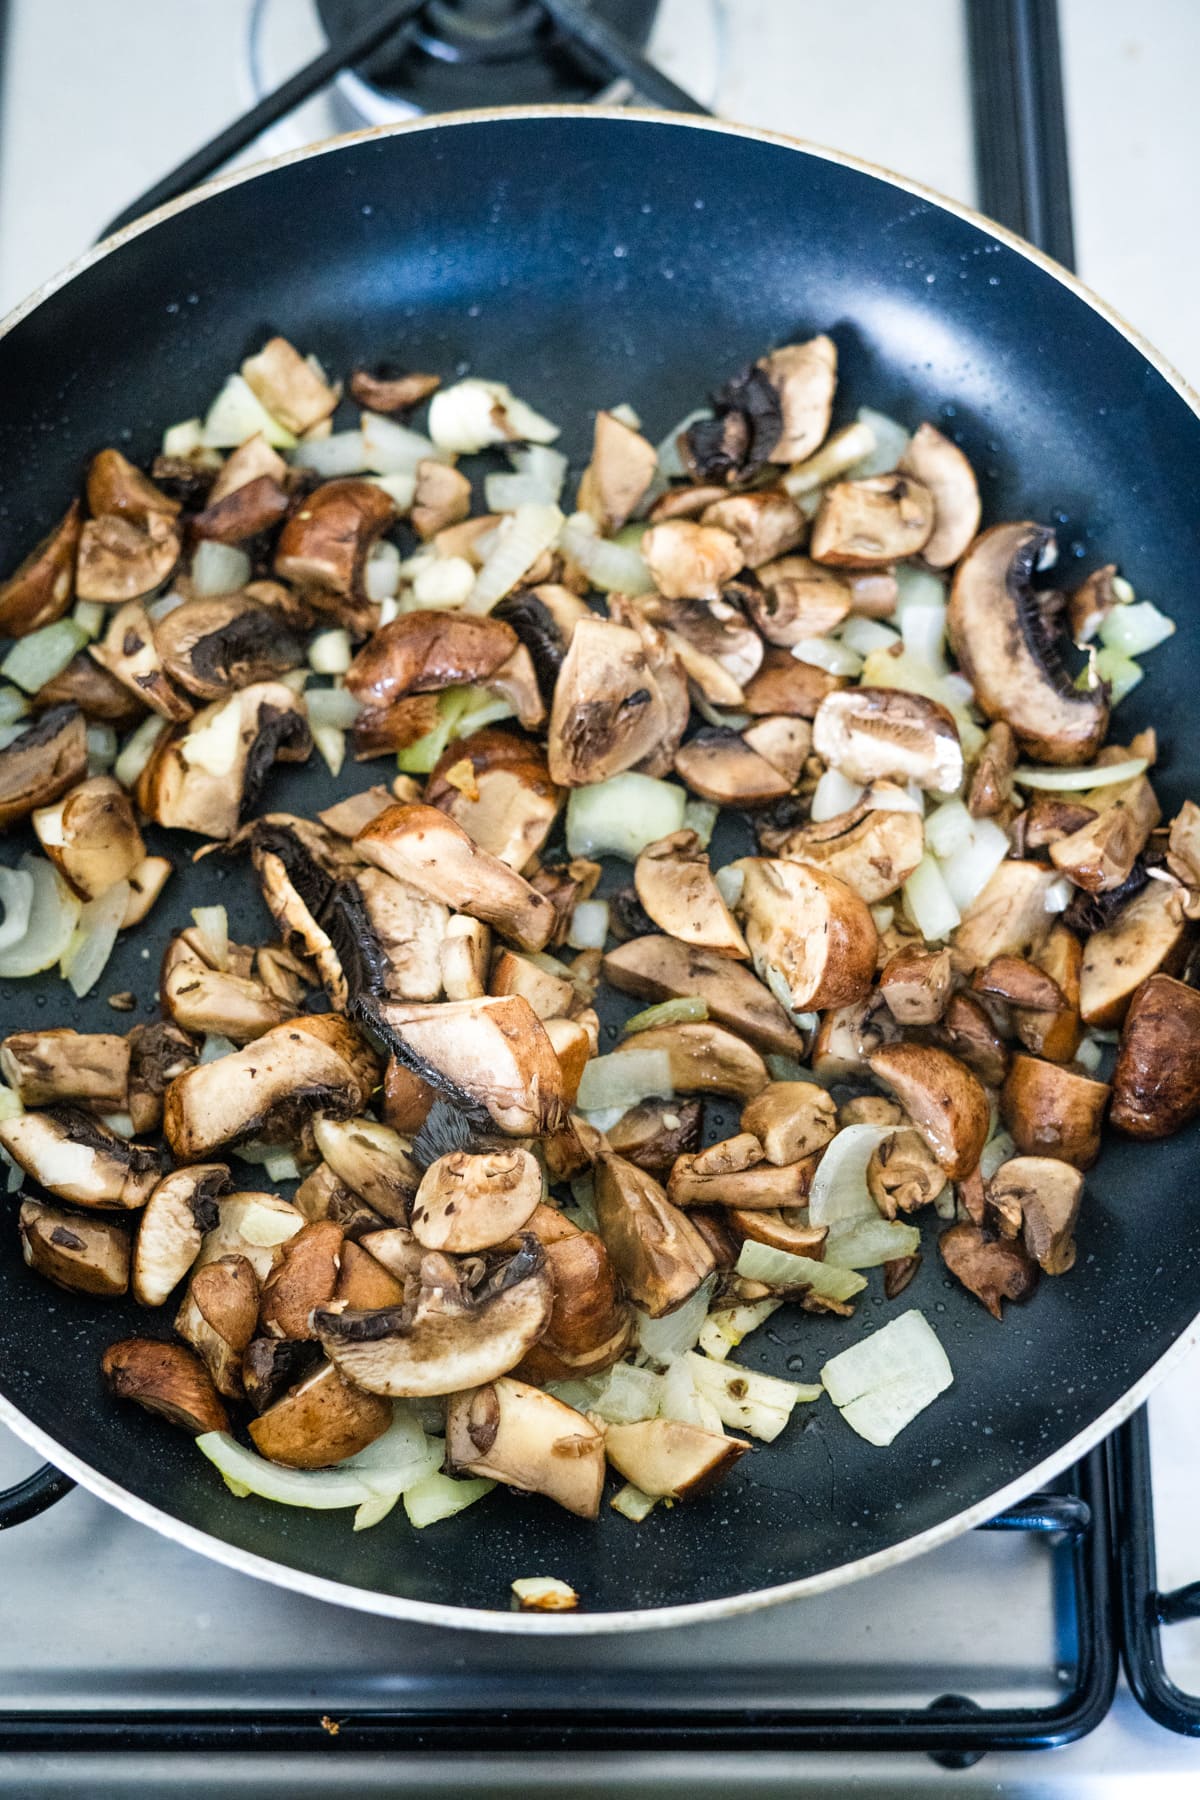 A frying pan with mushrooms and onions on it, cooked to perfection using an air fryer.